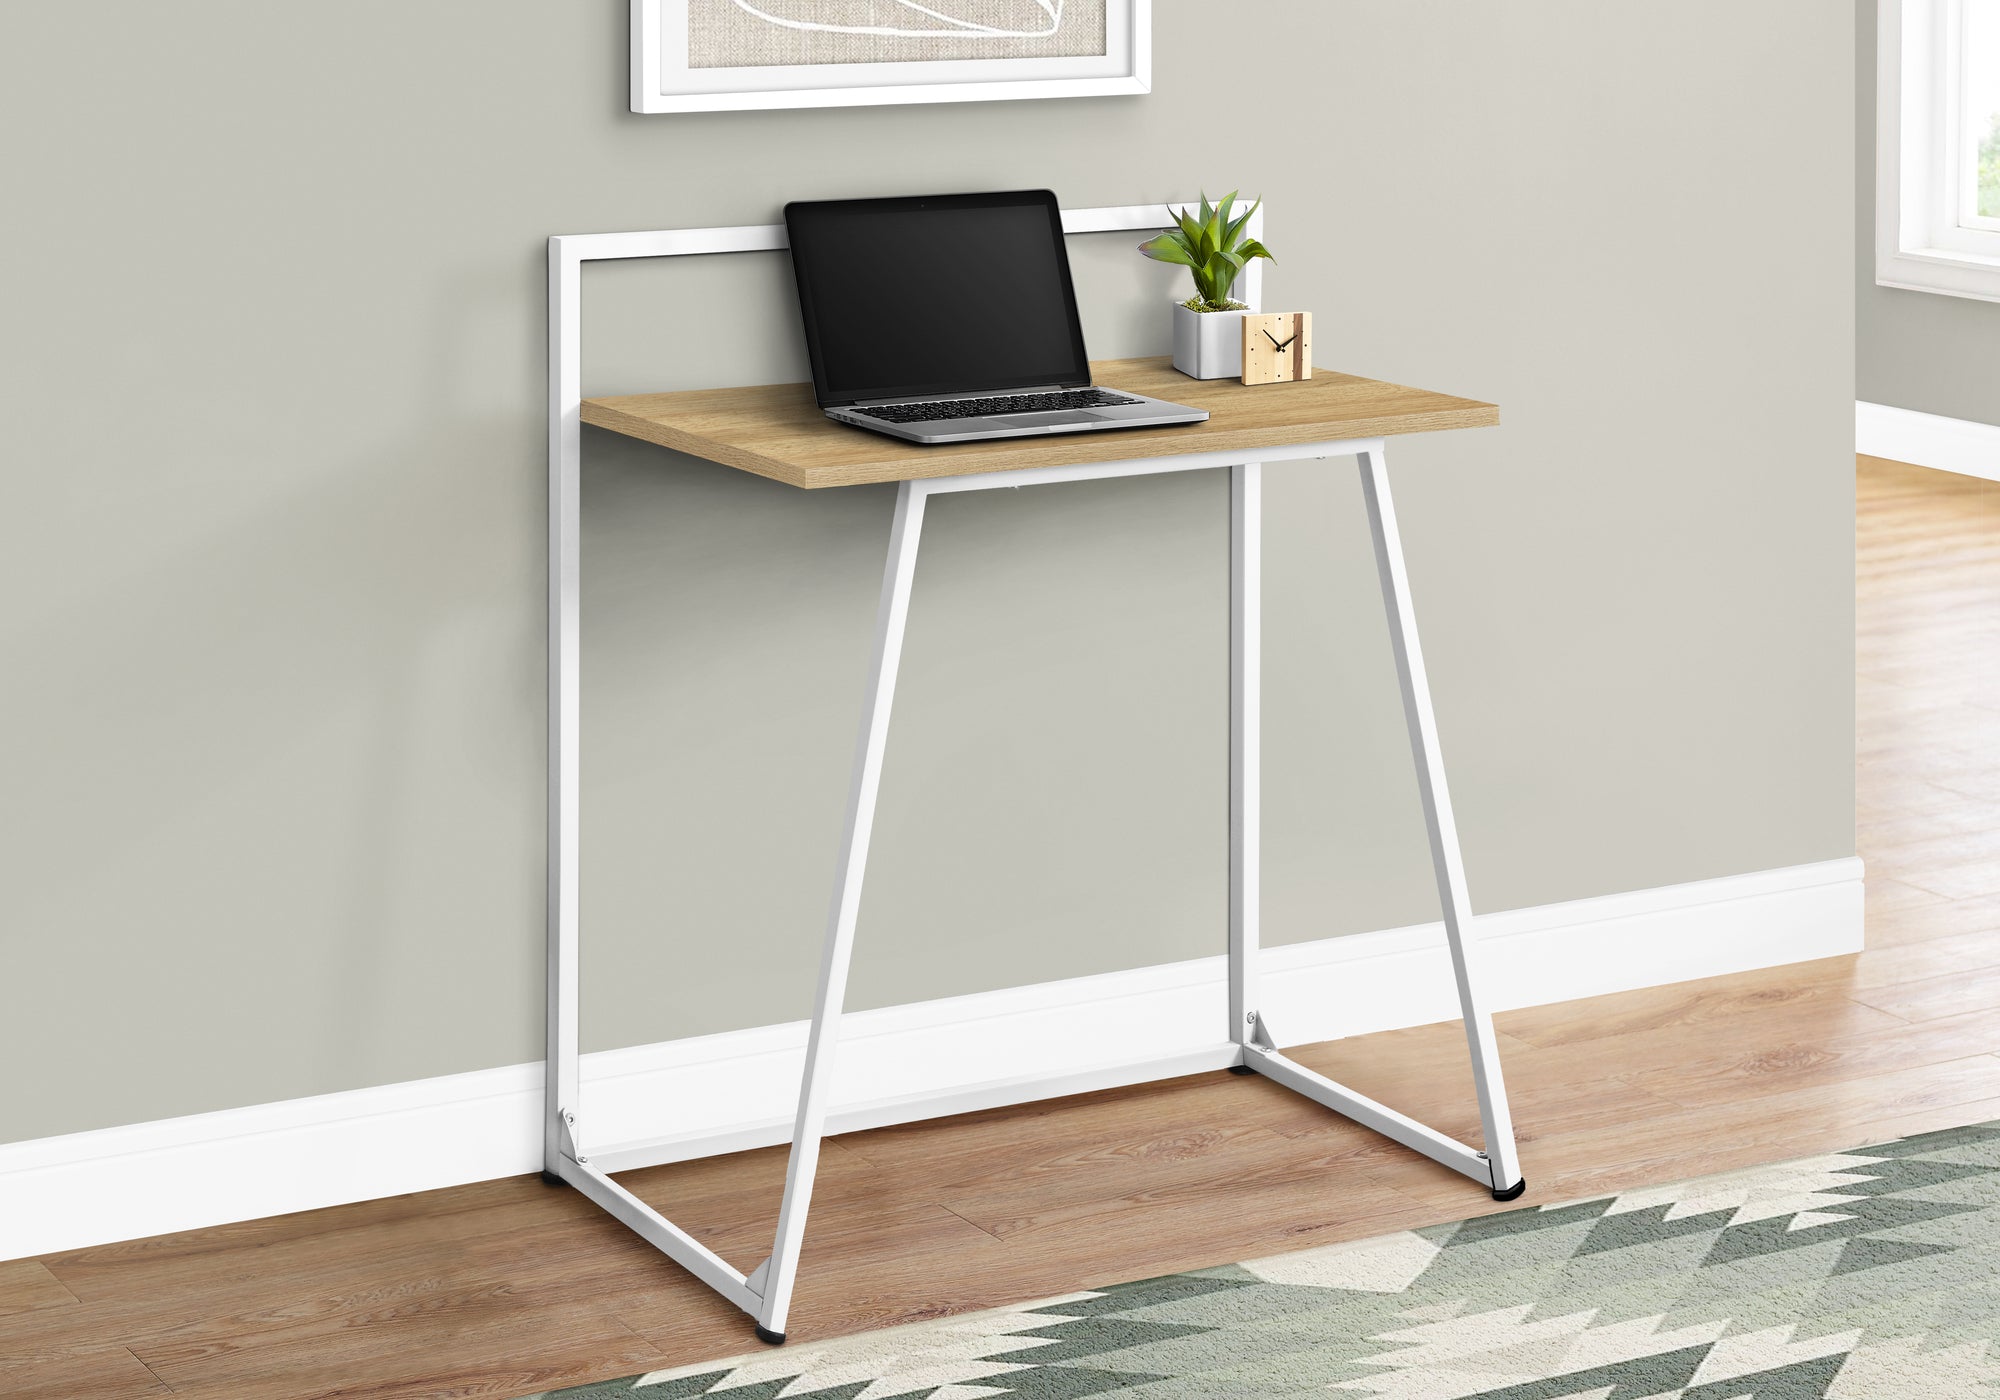 MN-127119    Computer Desk, Home Office, Laptop, 30"L, Metal, Laminate, Natural, White, Contemporary, Modern